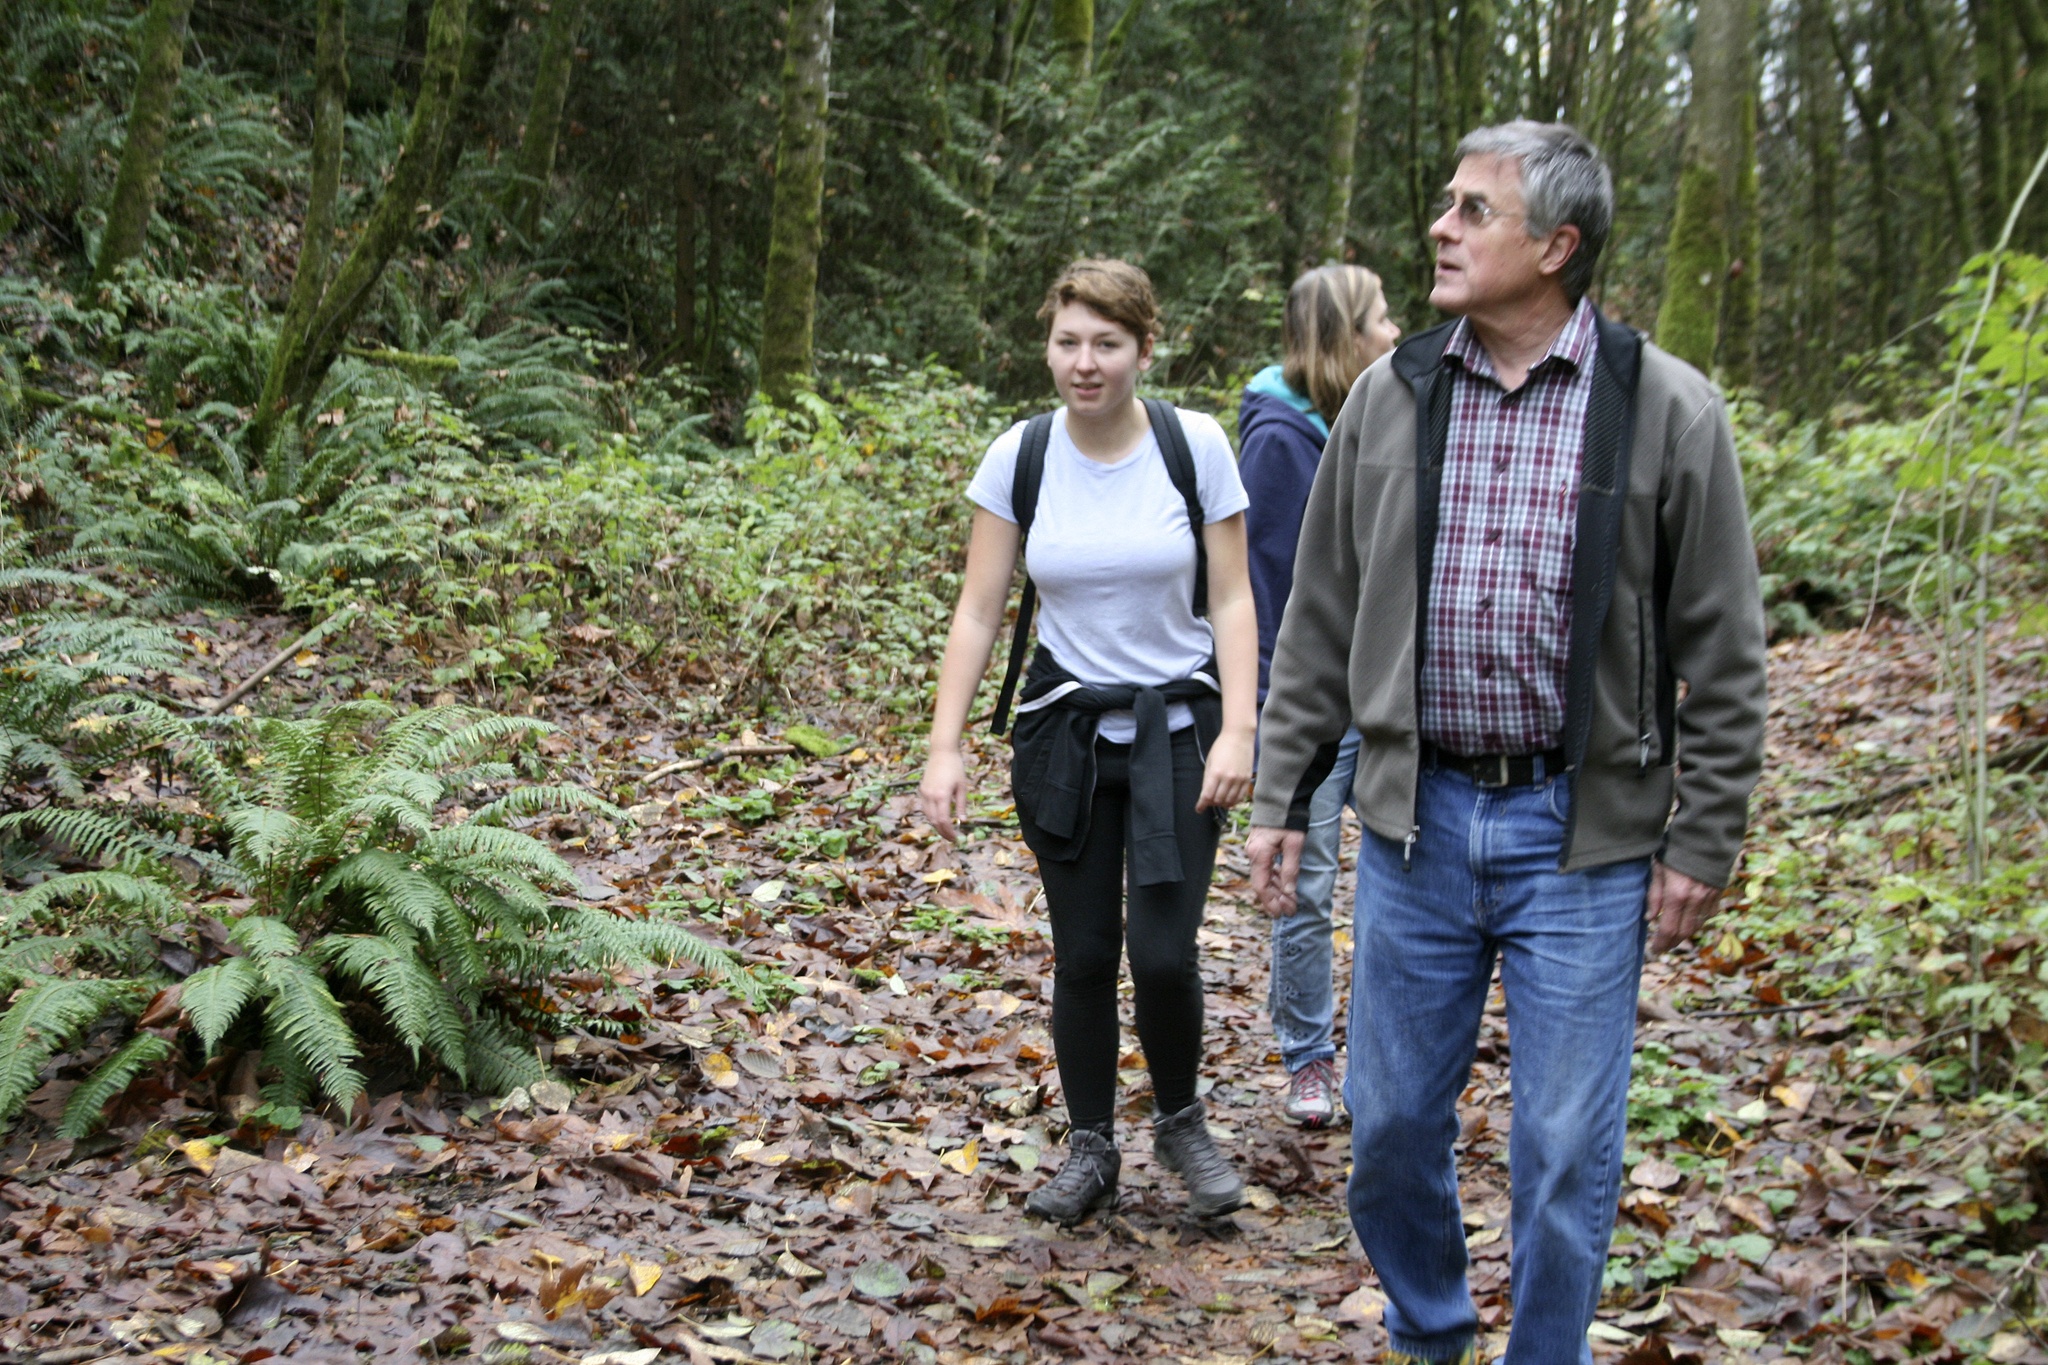 Shelton View Forest Stewardship Association (SVFSA) board members Hillary Sanders (left), Cheryl Stanford and Bob Rorabaugh go on a hike through the forest. CATHERINE KRUMMEY/Bothell Reporter